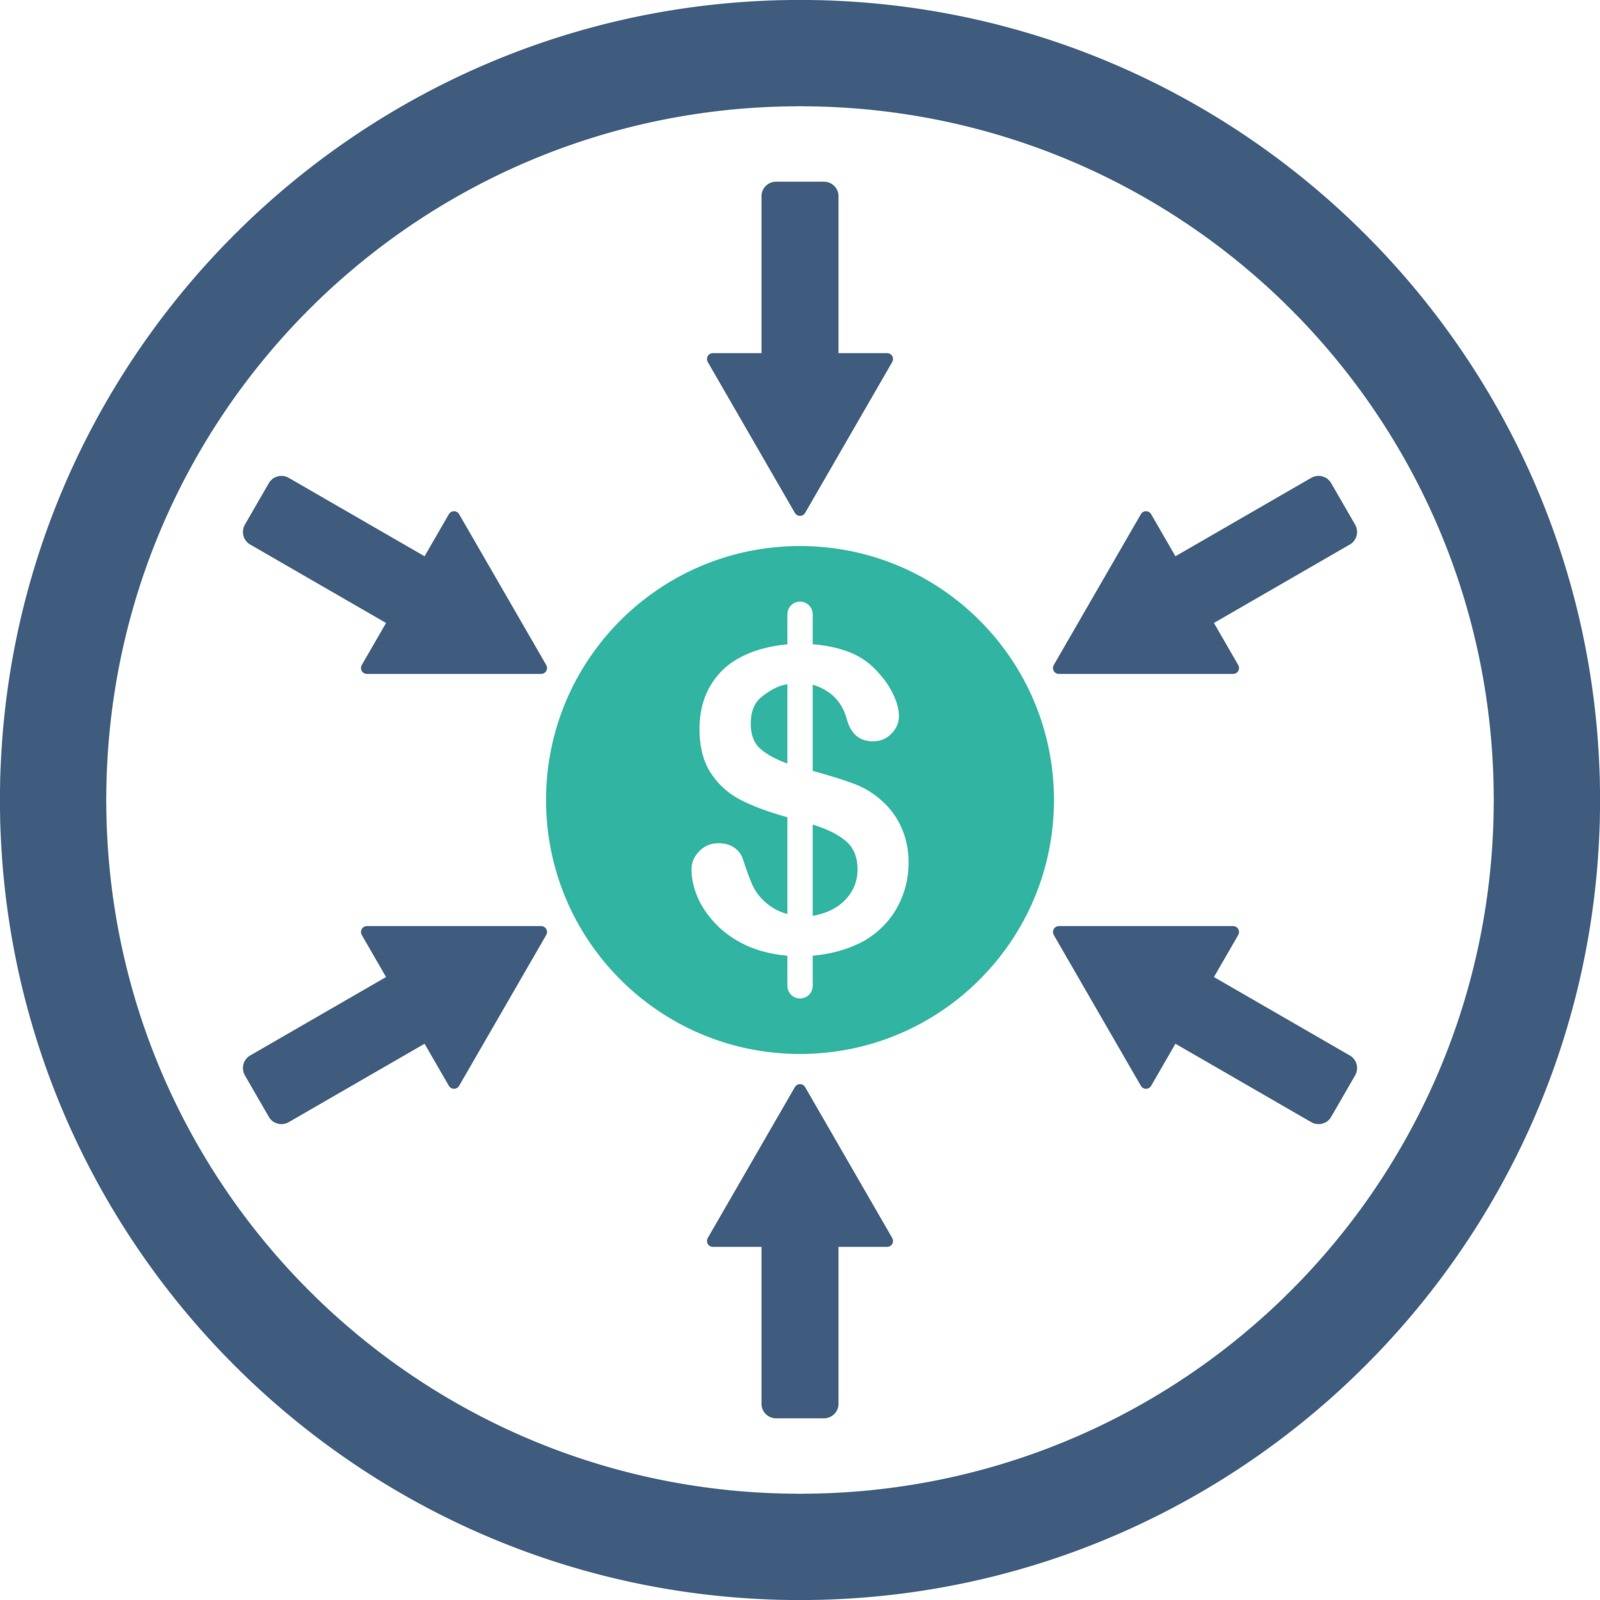 Income vector icon. This flat rounded symbol uses cobalt and cyan colors and isolated on a white background.